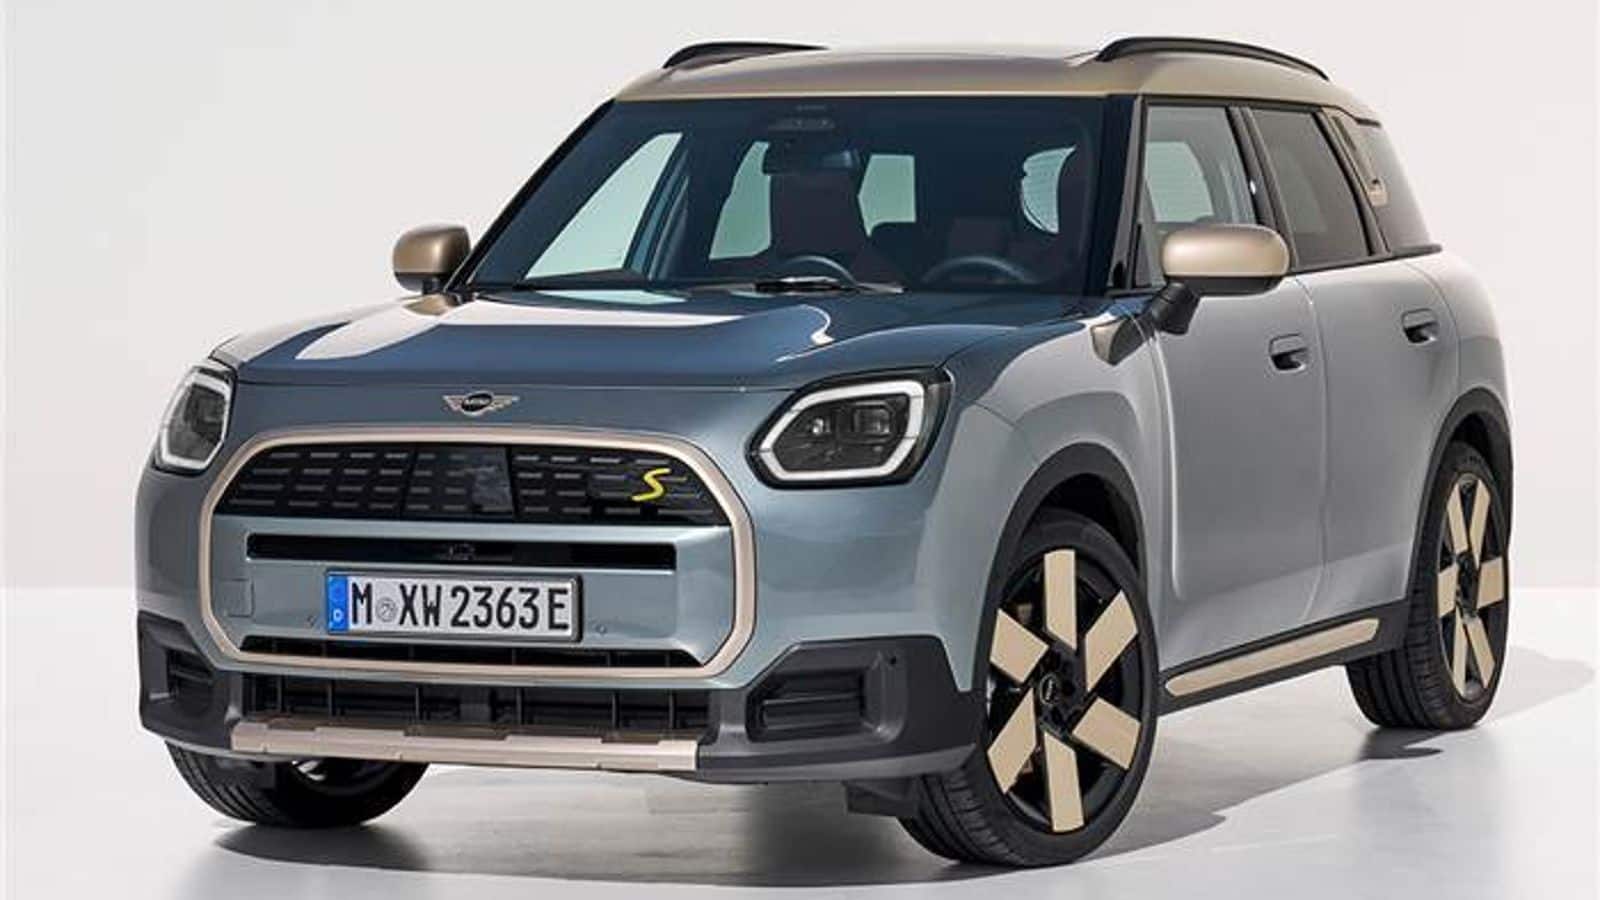 MINI Countryman electric SUV now available for pre-booking in India